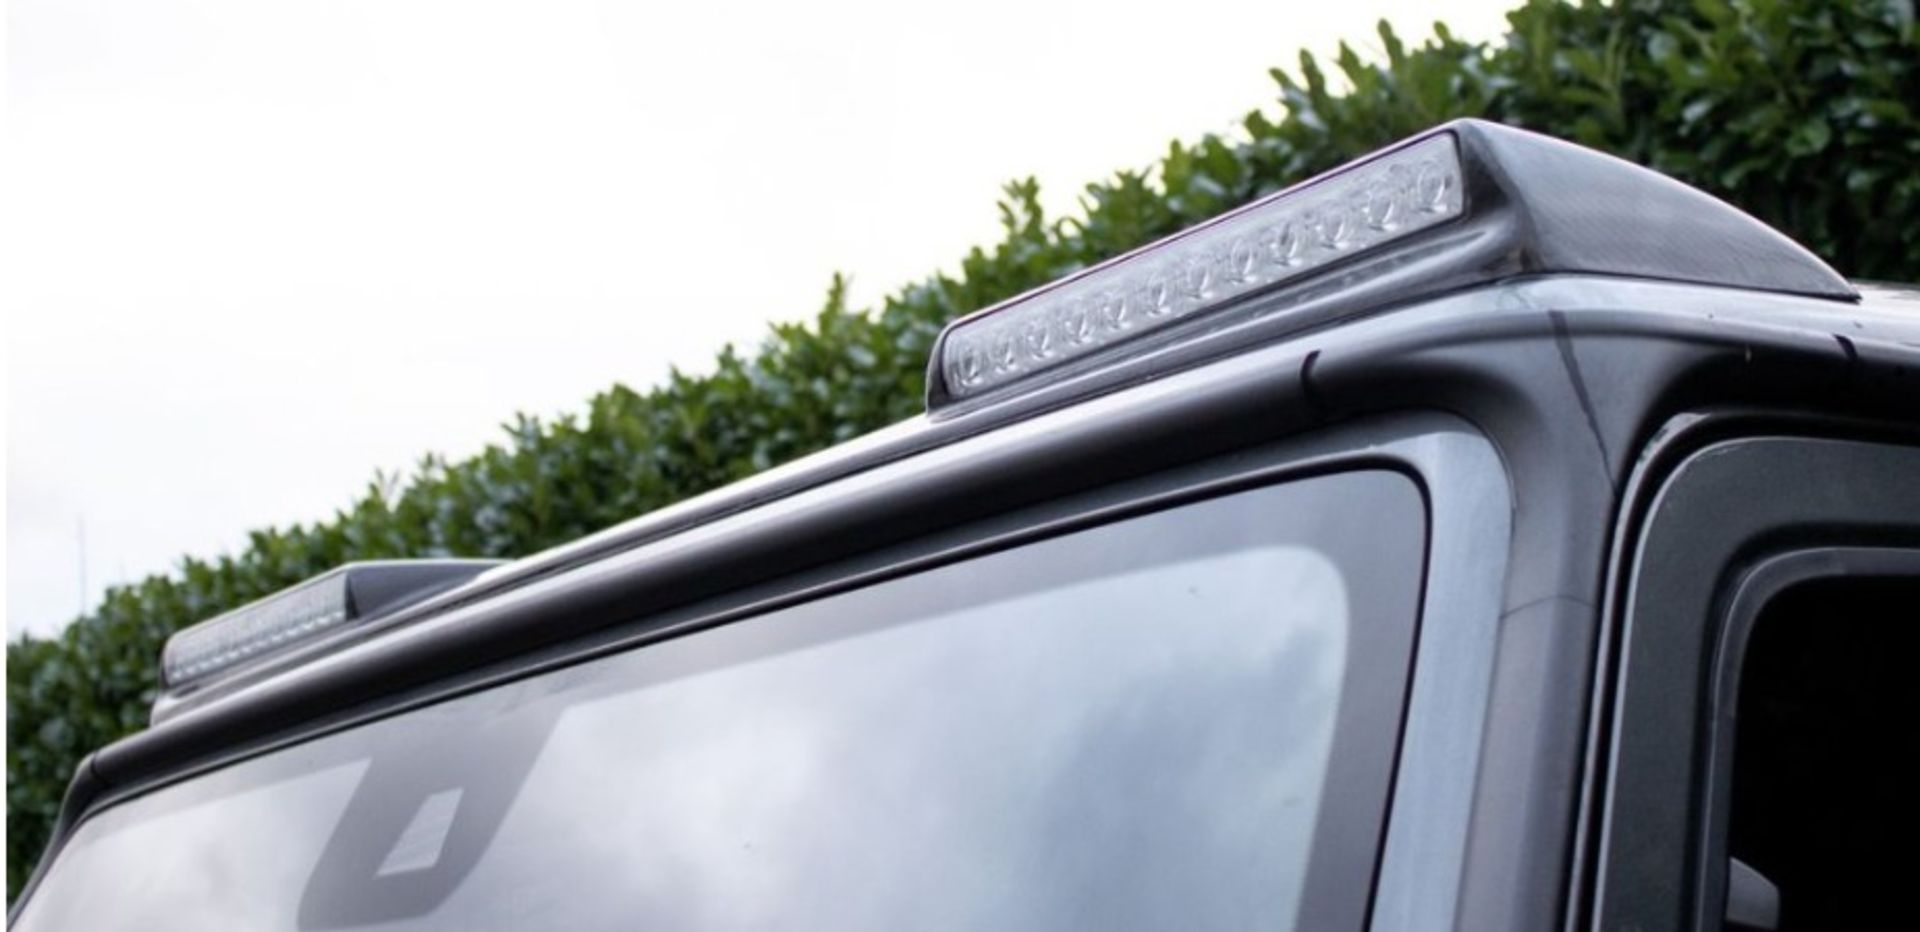 MERCEDES G63 BRABUS WIDE-STAR 800 STYLING GREY WITH BLACK LEATHER INTERIOR - Image 18 of 27